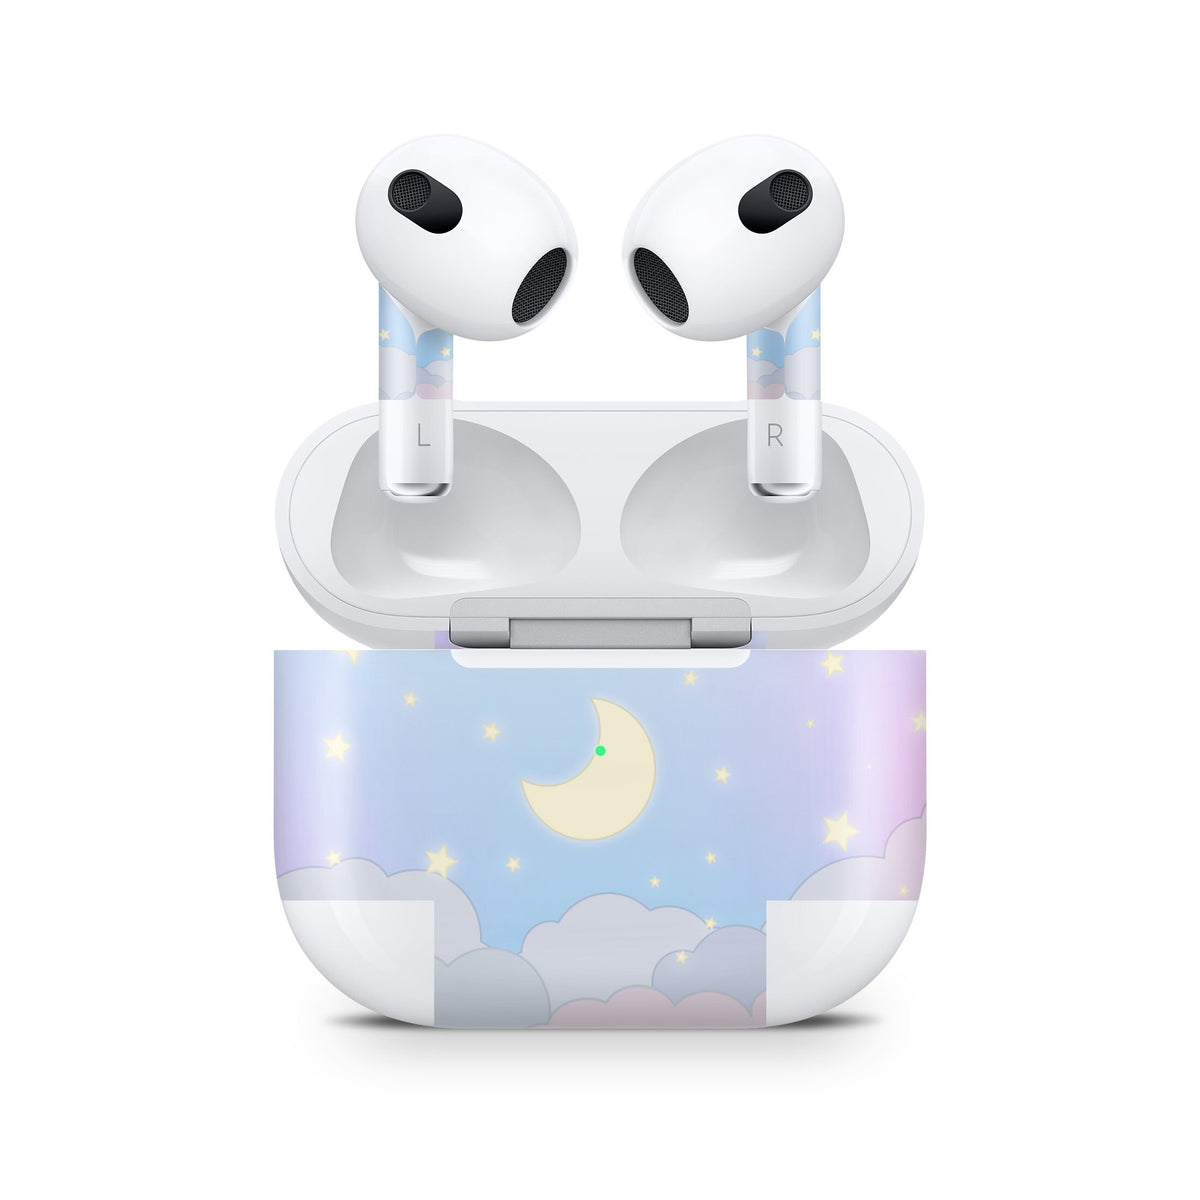 Clouds Apple Airpod Skins, Blue Airpods Sticker for Airpods 3 skin Vinyl 3m, Airpods skin earbuds, Airpods Protective Full wrap Cover